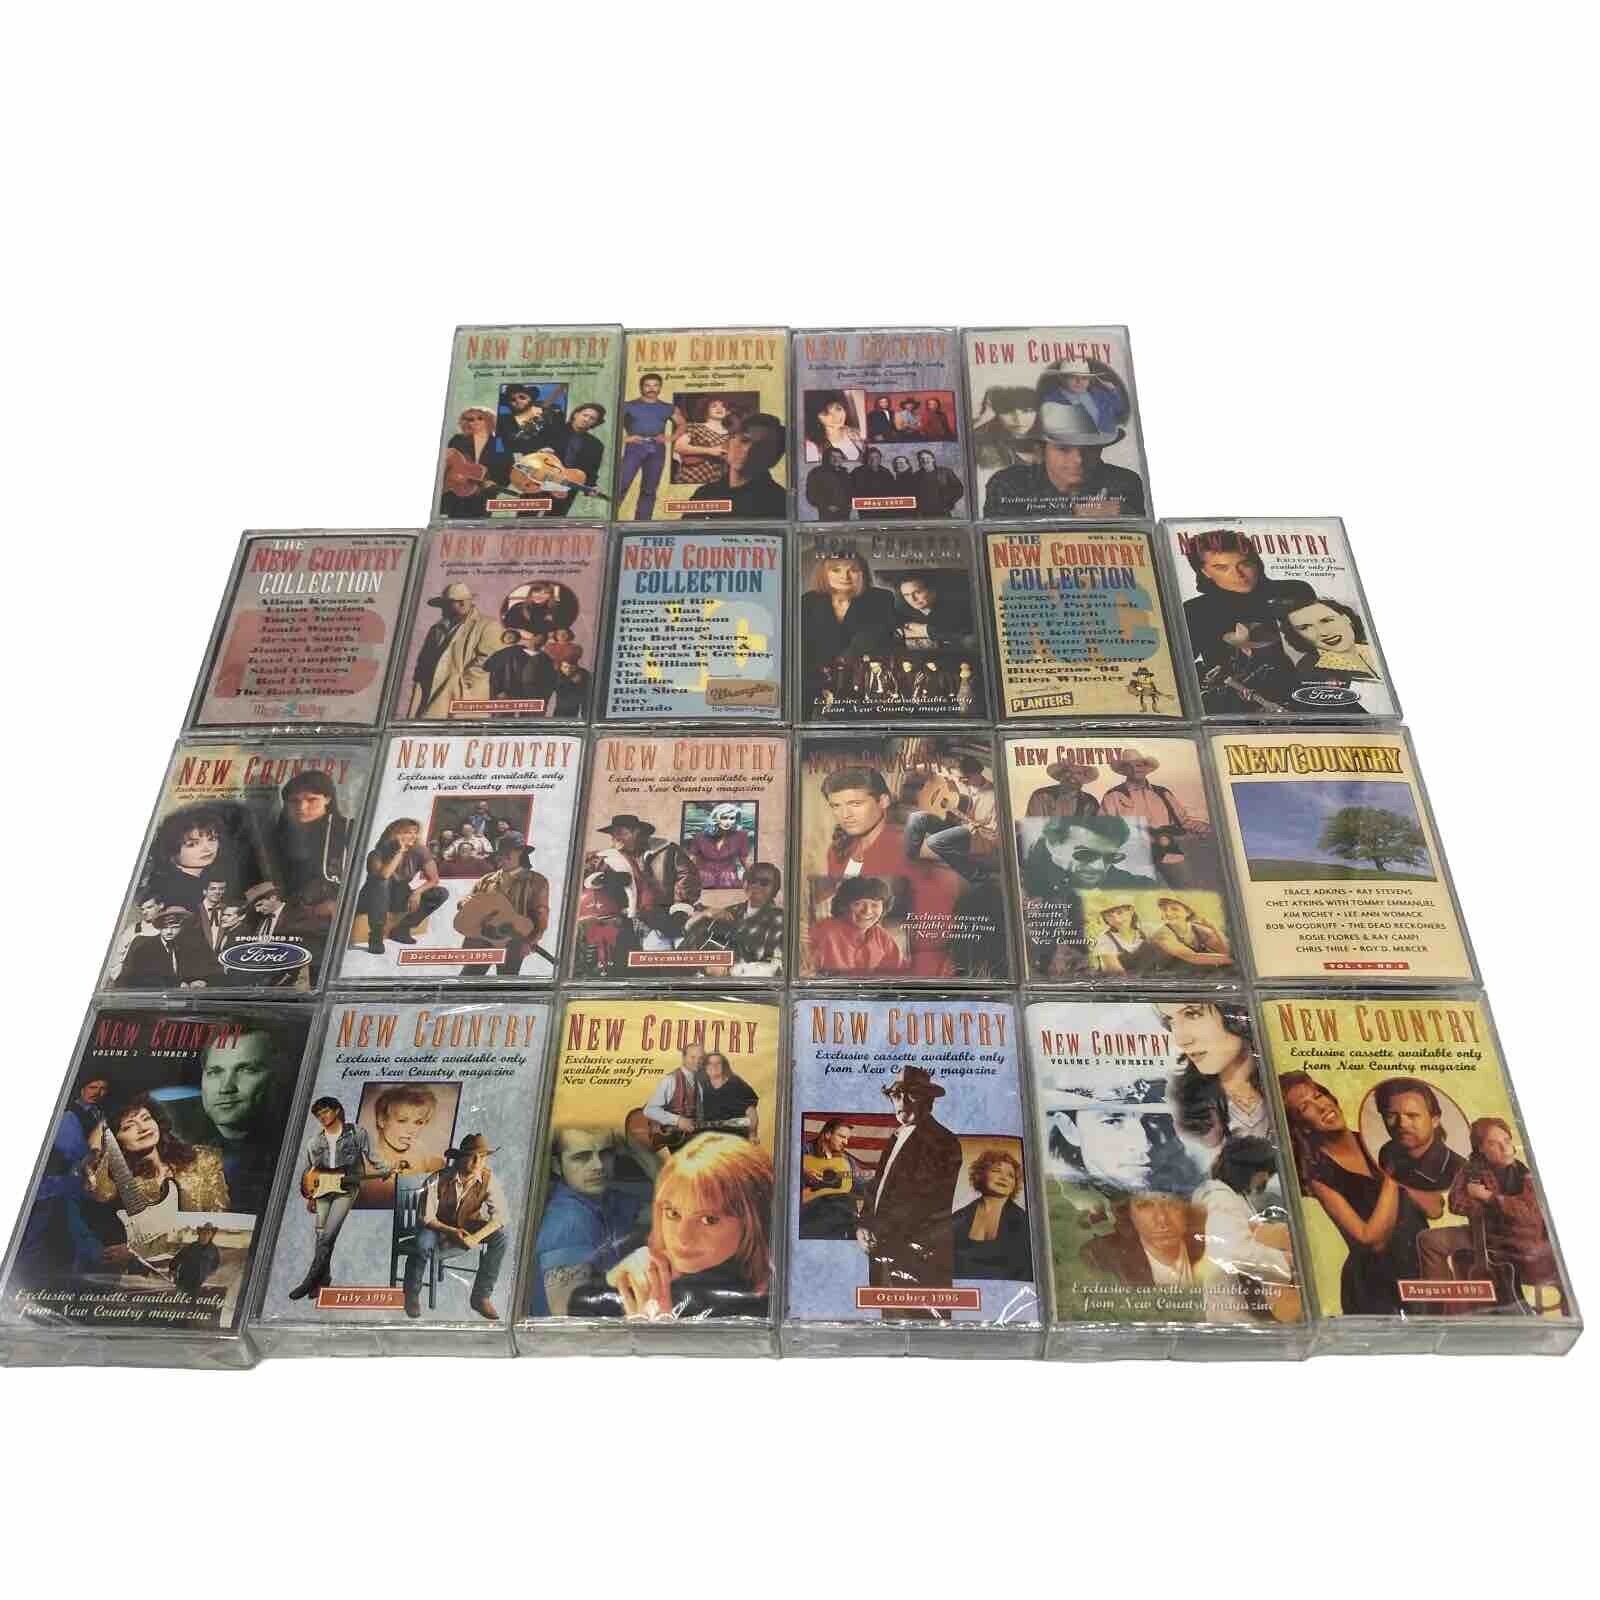 22 Vintage Country Cassettes 90s 1995 (19 Sealed-3 Opened)